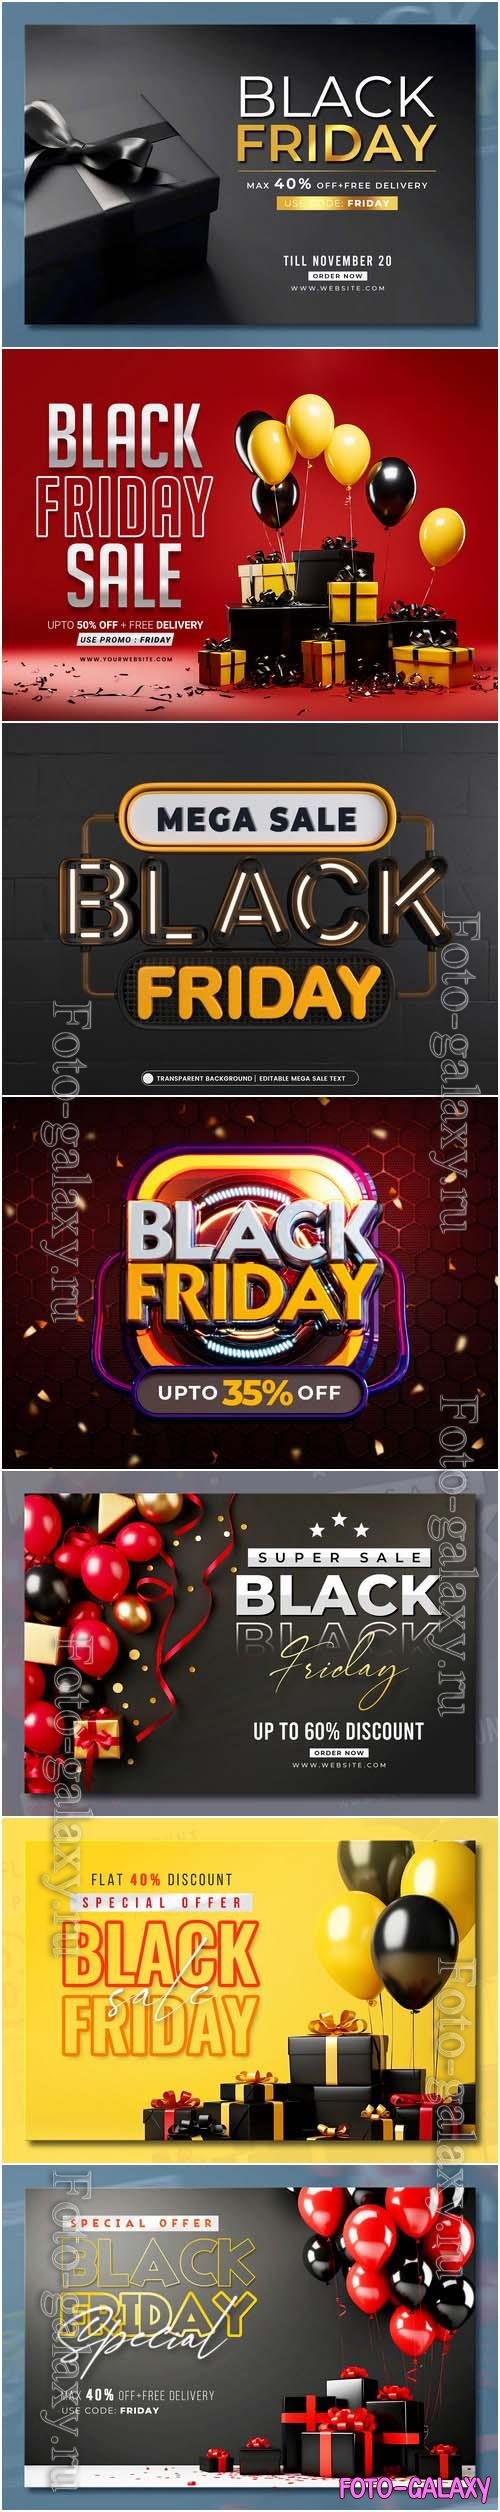 Black friday sale banner with realistic 3d gifts and balloons in psd vol 5